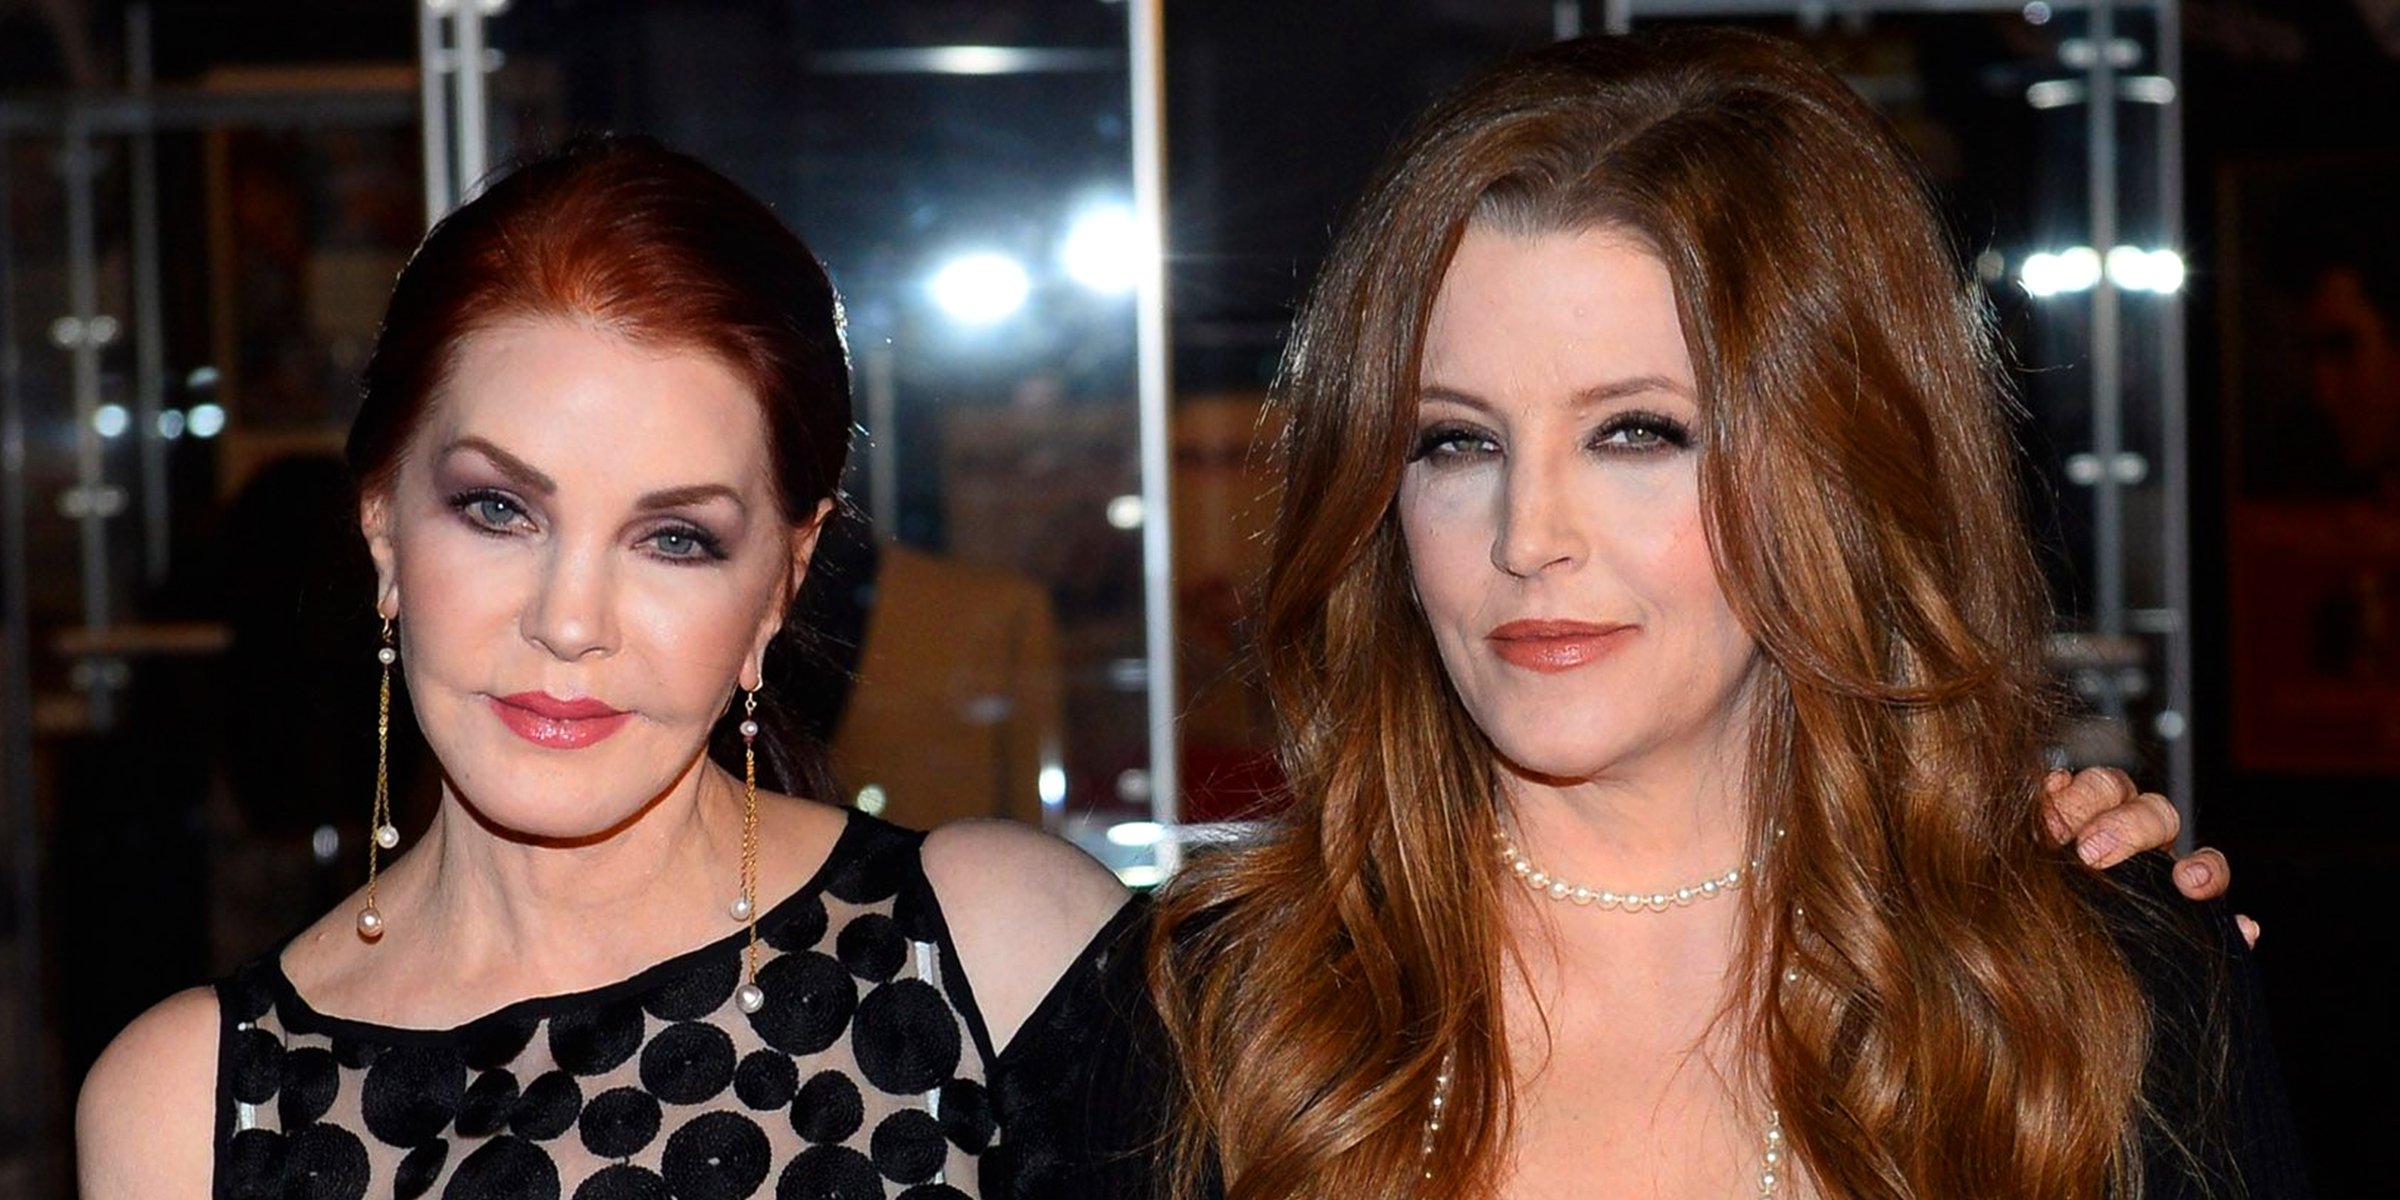 Priscilla Presley and Lisa Marie Presley | Source: Getty Images